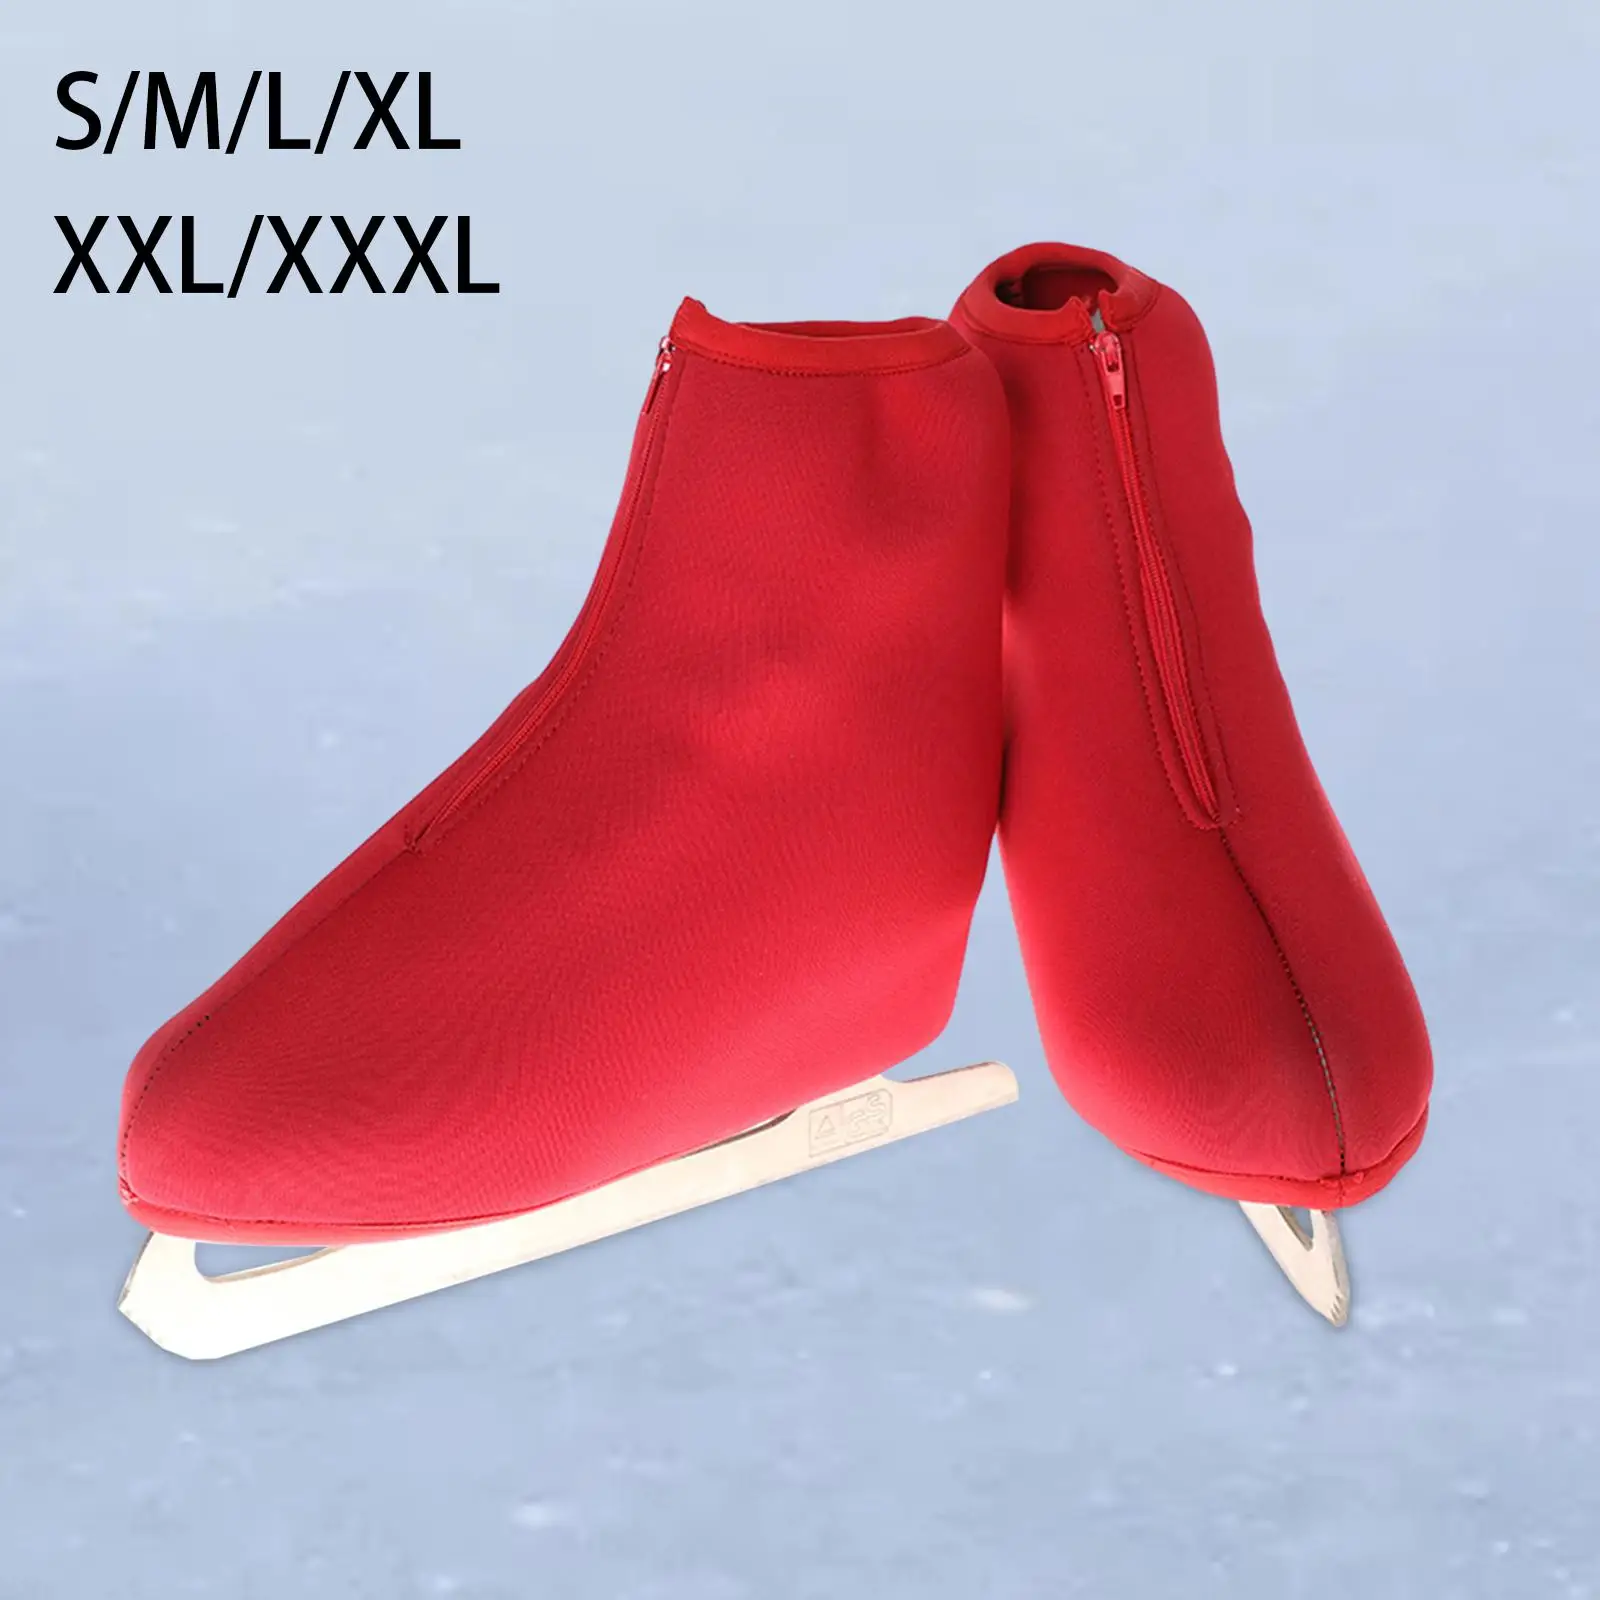 1 Pair Skate Boot Covers Winter Sports Supplies Overshoes Skating Boot Covers Adult Protective for Roller Skates Figure Skates